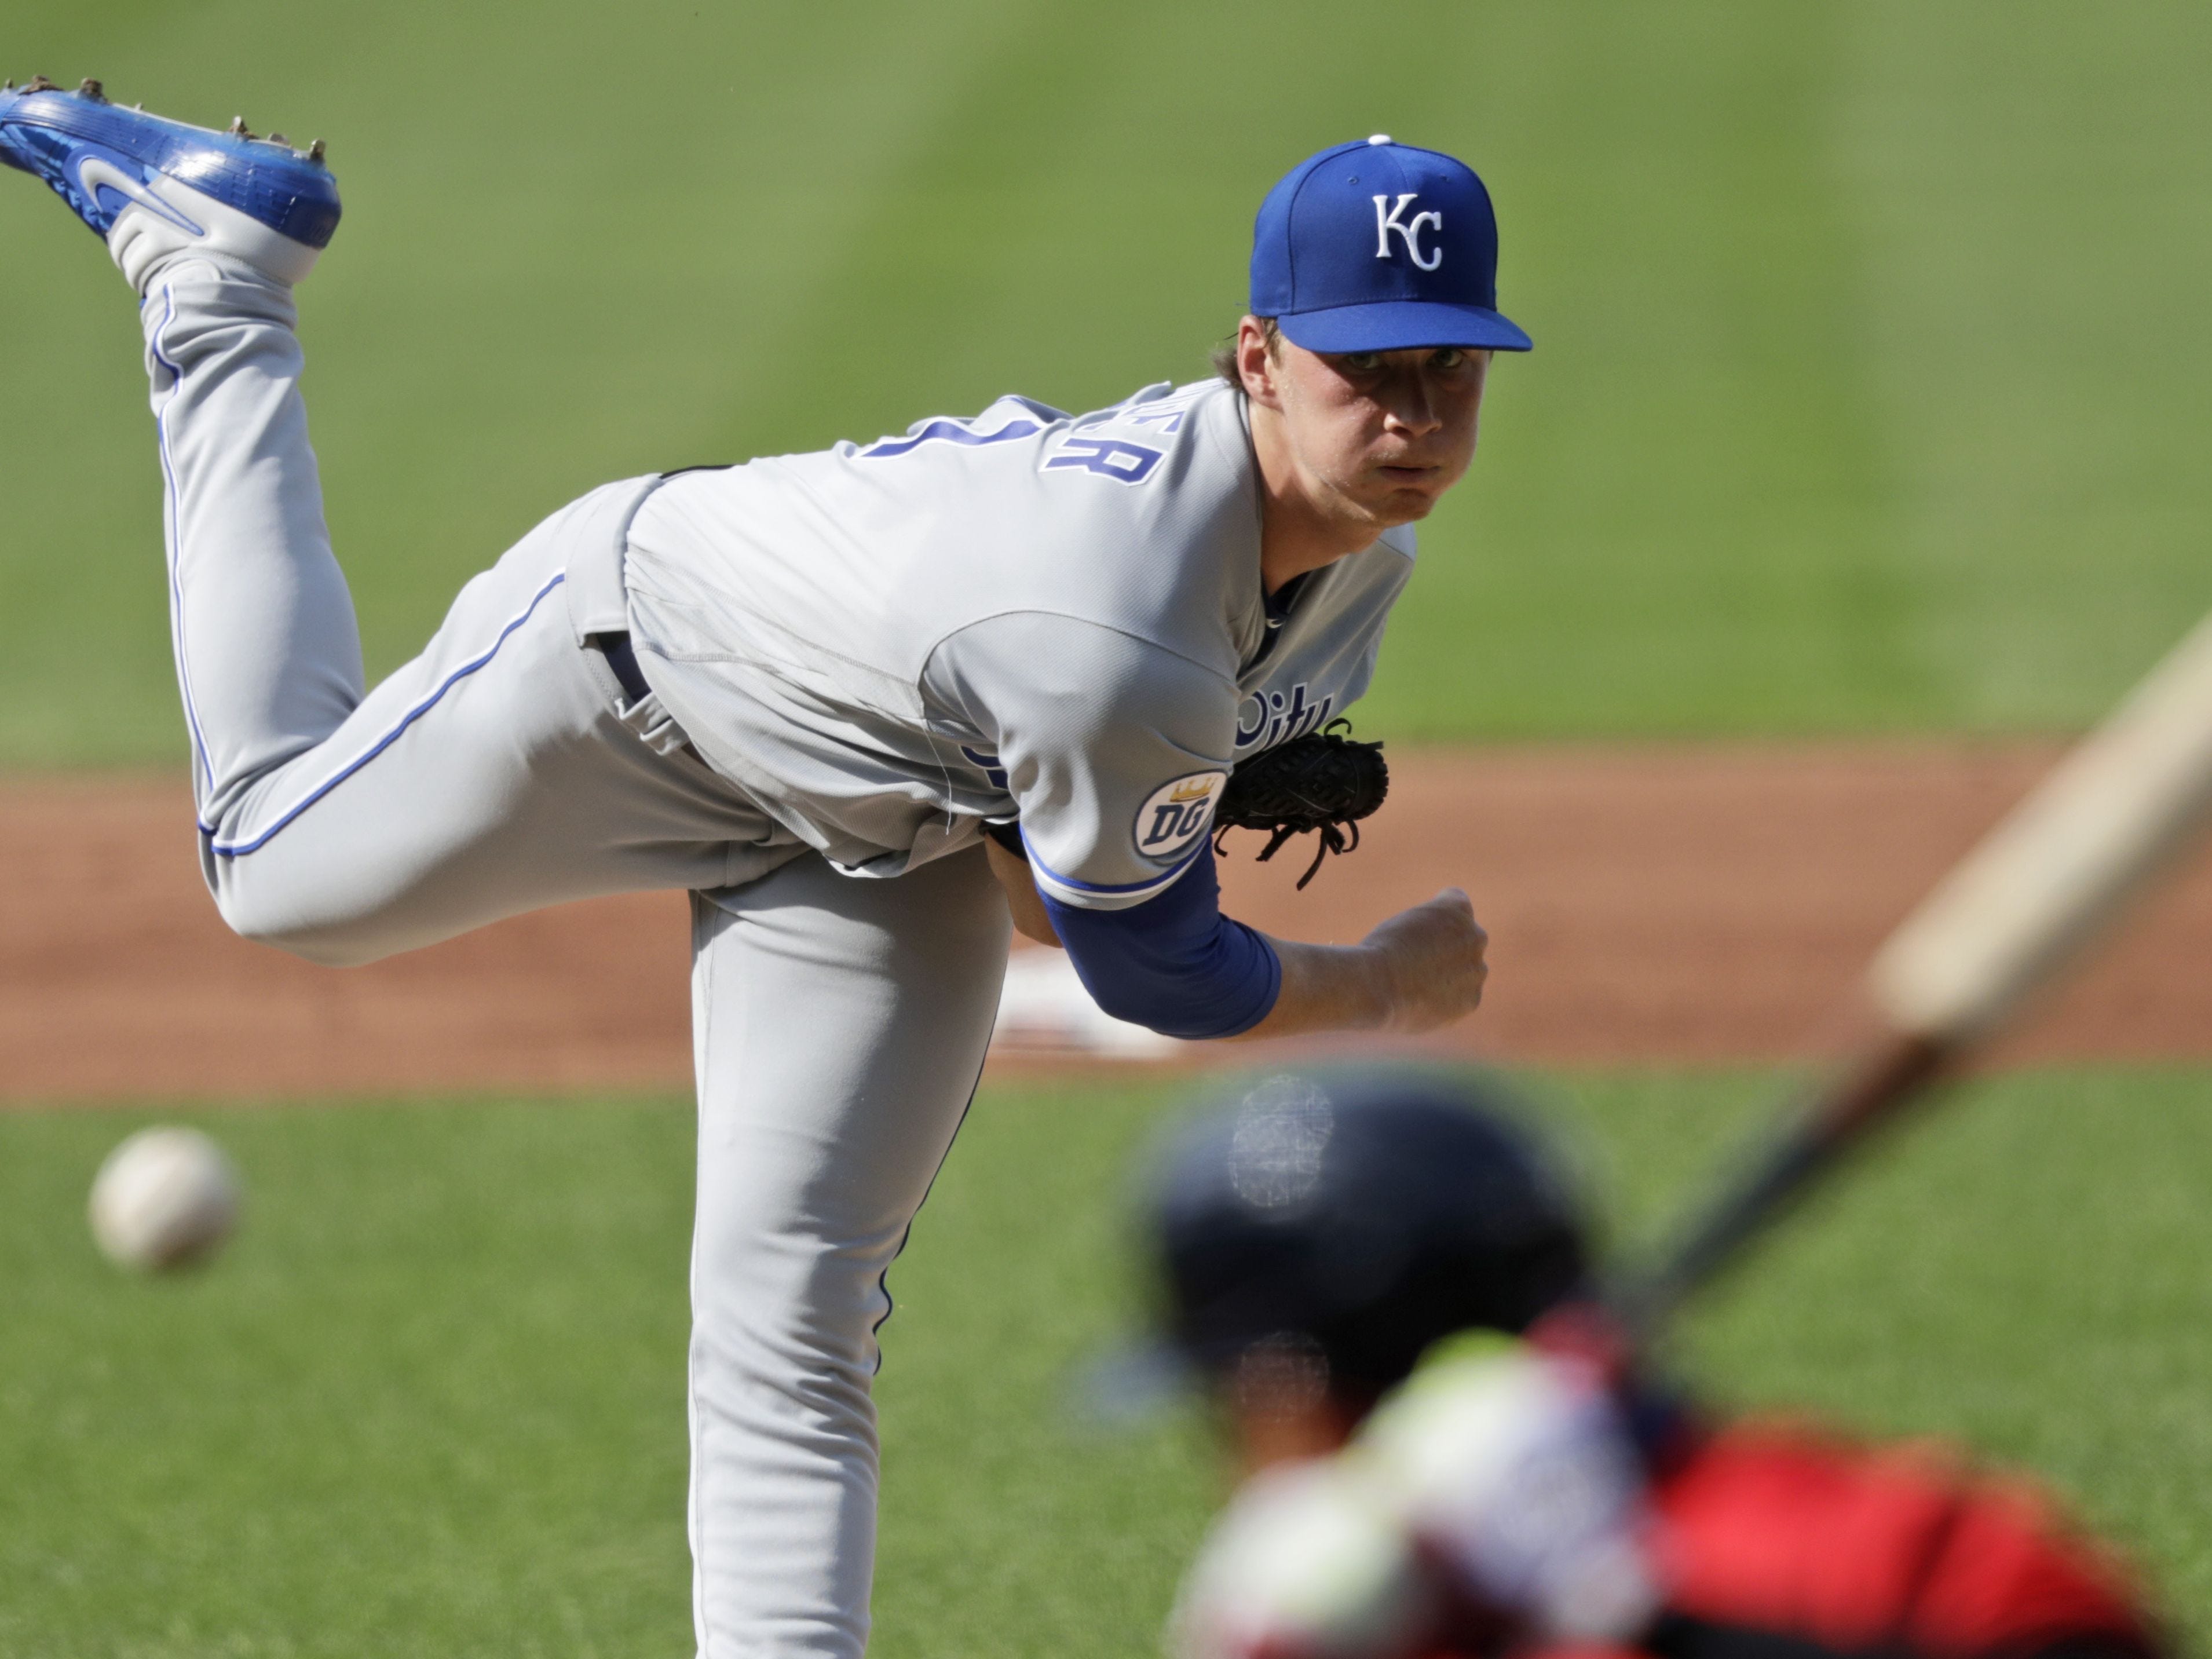 Kansas City Royals starting pitcher Brady Singer delivers to Cleveland Indians' Cesar Hernandez in the first inning in a baseball game Saturday, July 25, 2020, in Cleveland. (AP Photo/Tony Dejak)